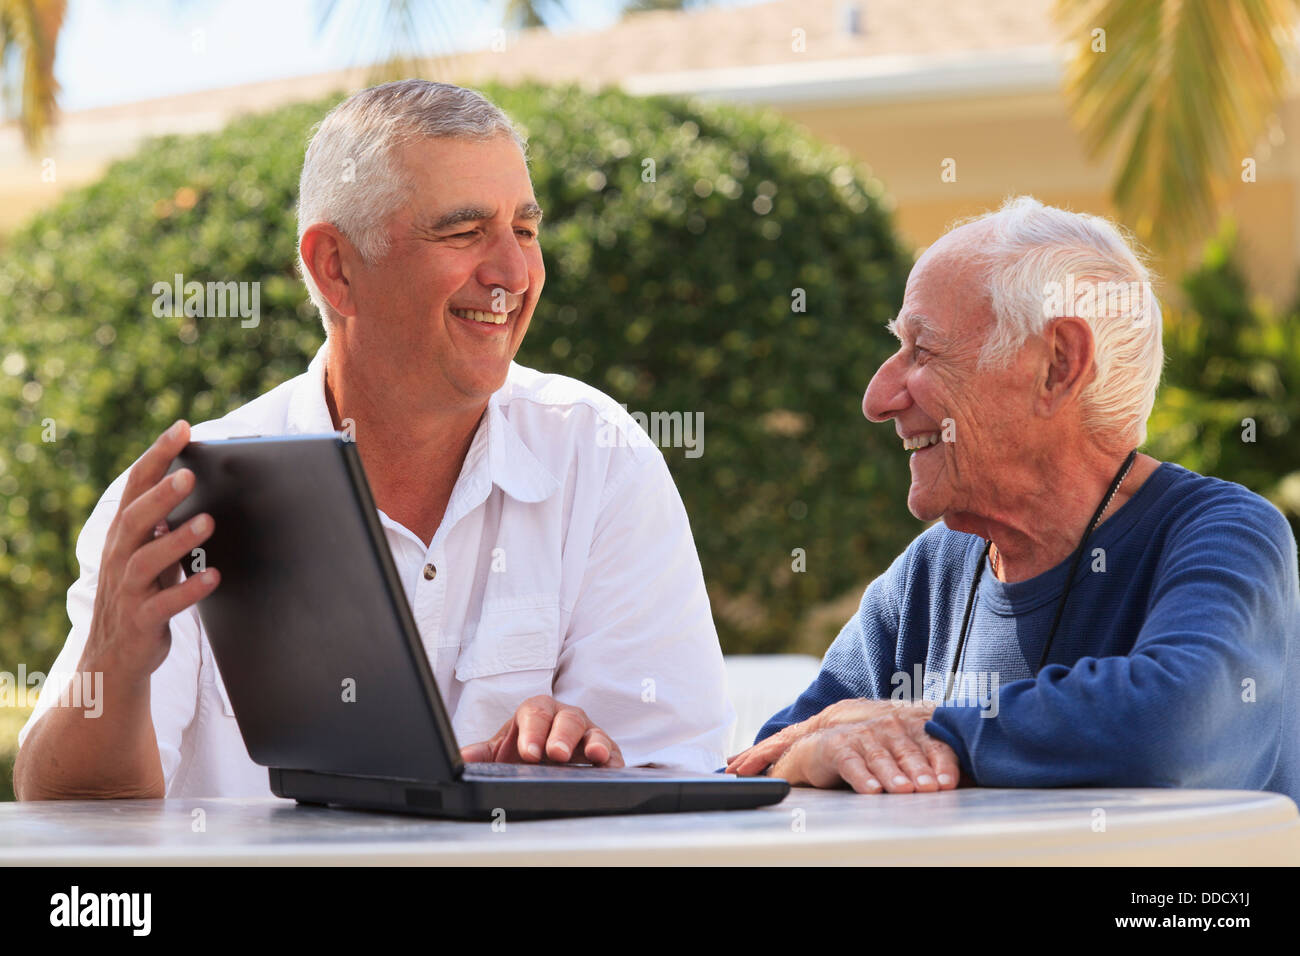 Senior man smiling showing a laptop to his father Stock Photo